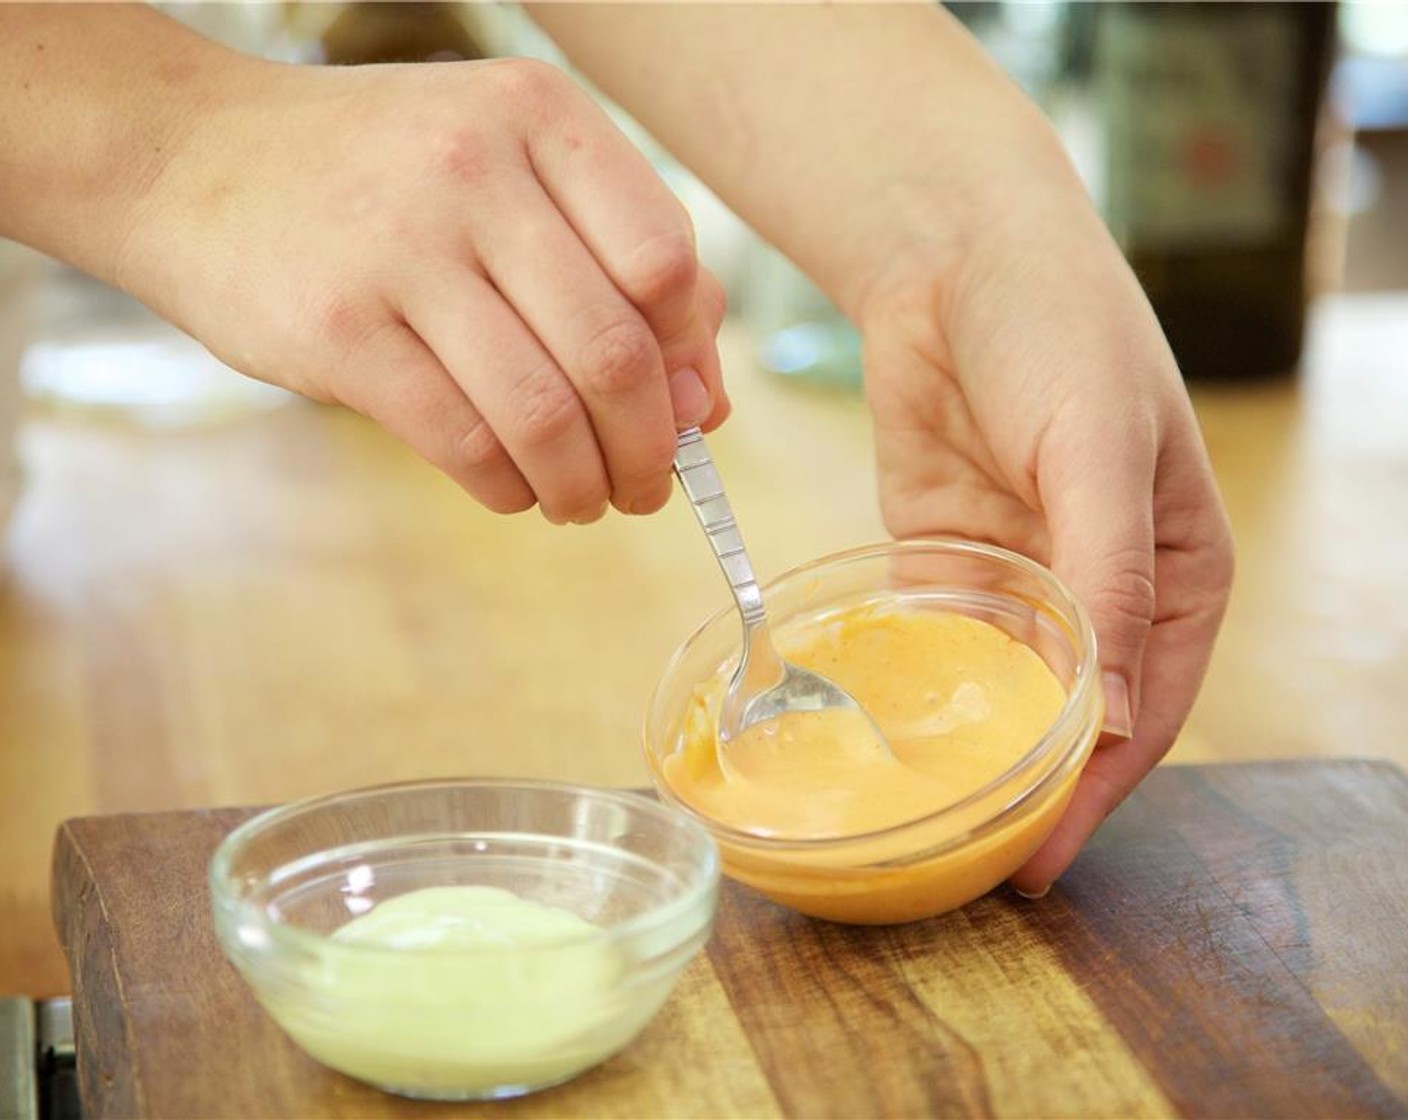 step 5 In a second small bowl, mix one teaspoon of cold water with Wasabi Powder (1 tsp) and mix into a smooth paste. Add remaining Mayonnaise (1 Tbsp).